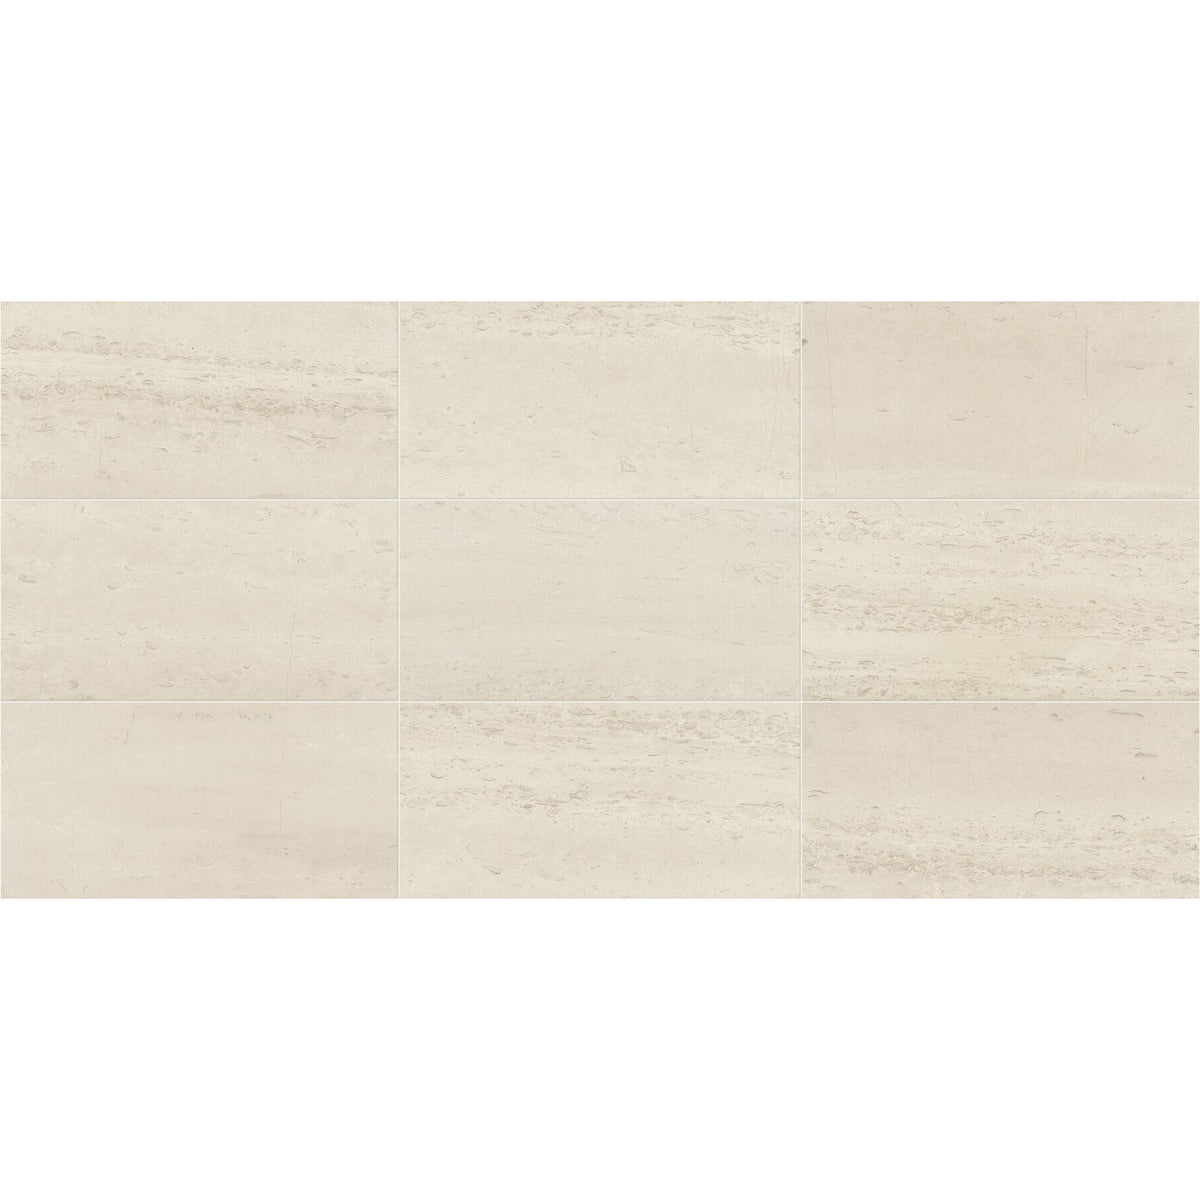 Daltile - Center City - 12 in. x 24 in. Natural Stone - Carlton Beige Polished